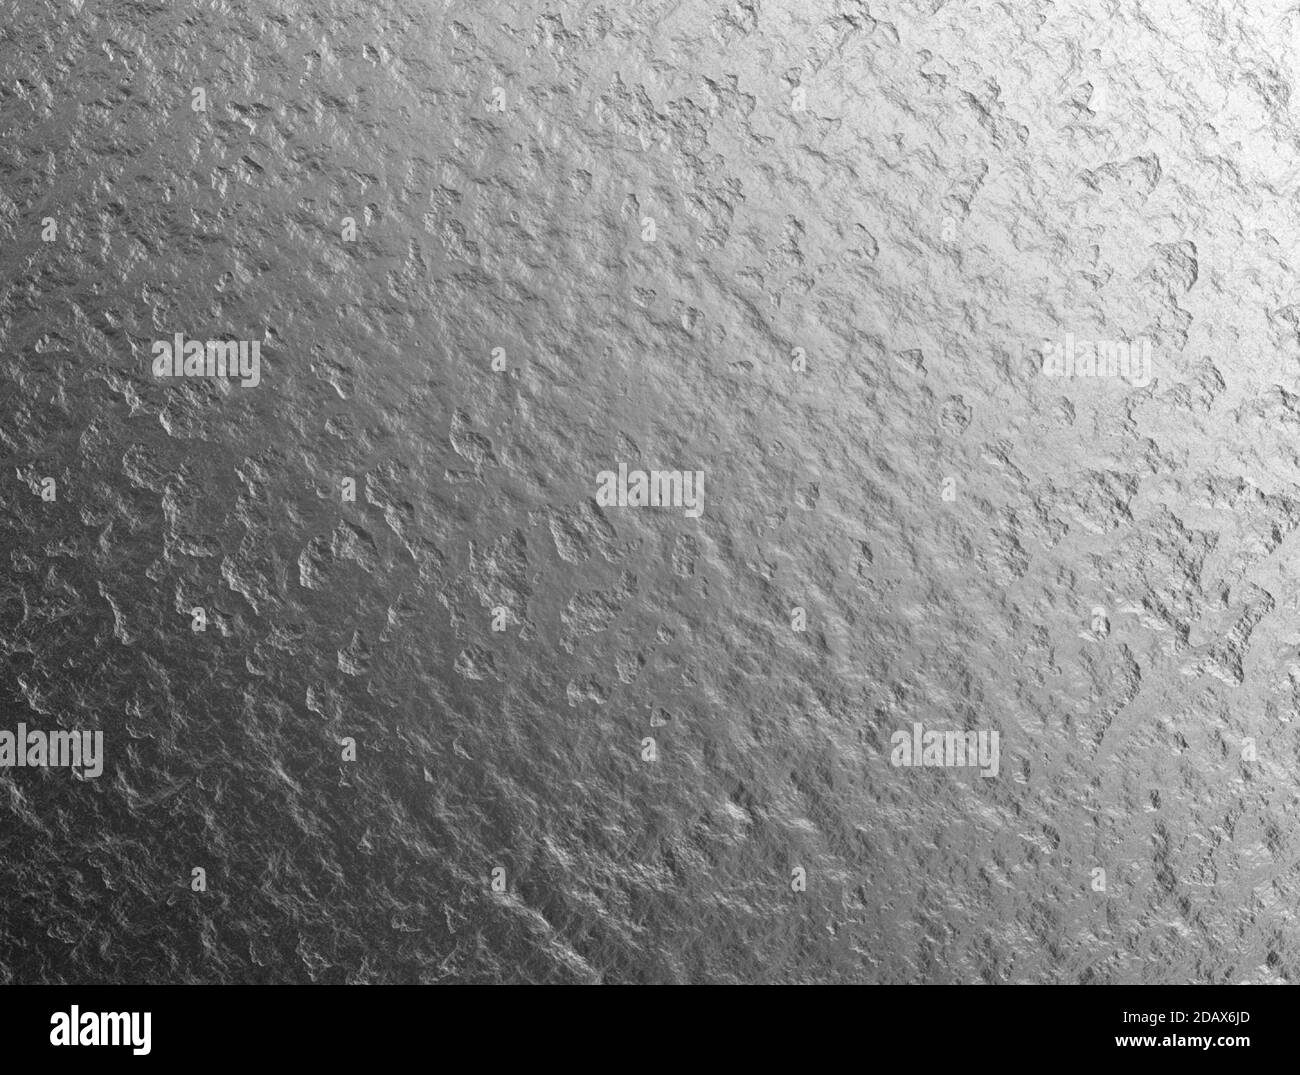 Rough metal or rocky ore surface texture. High resolution background texture Stock Photo